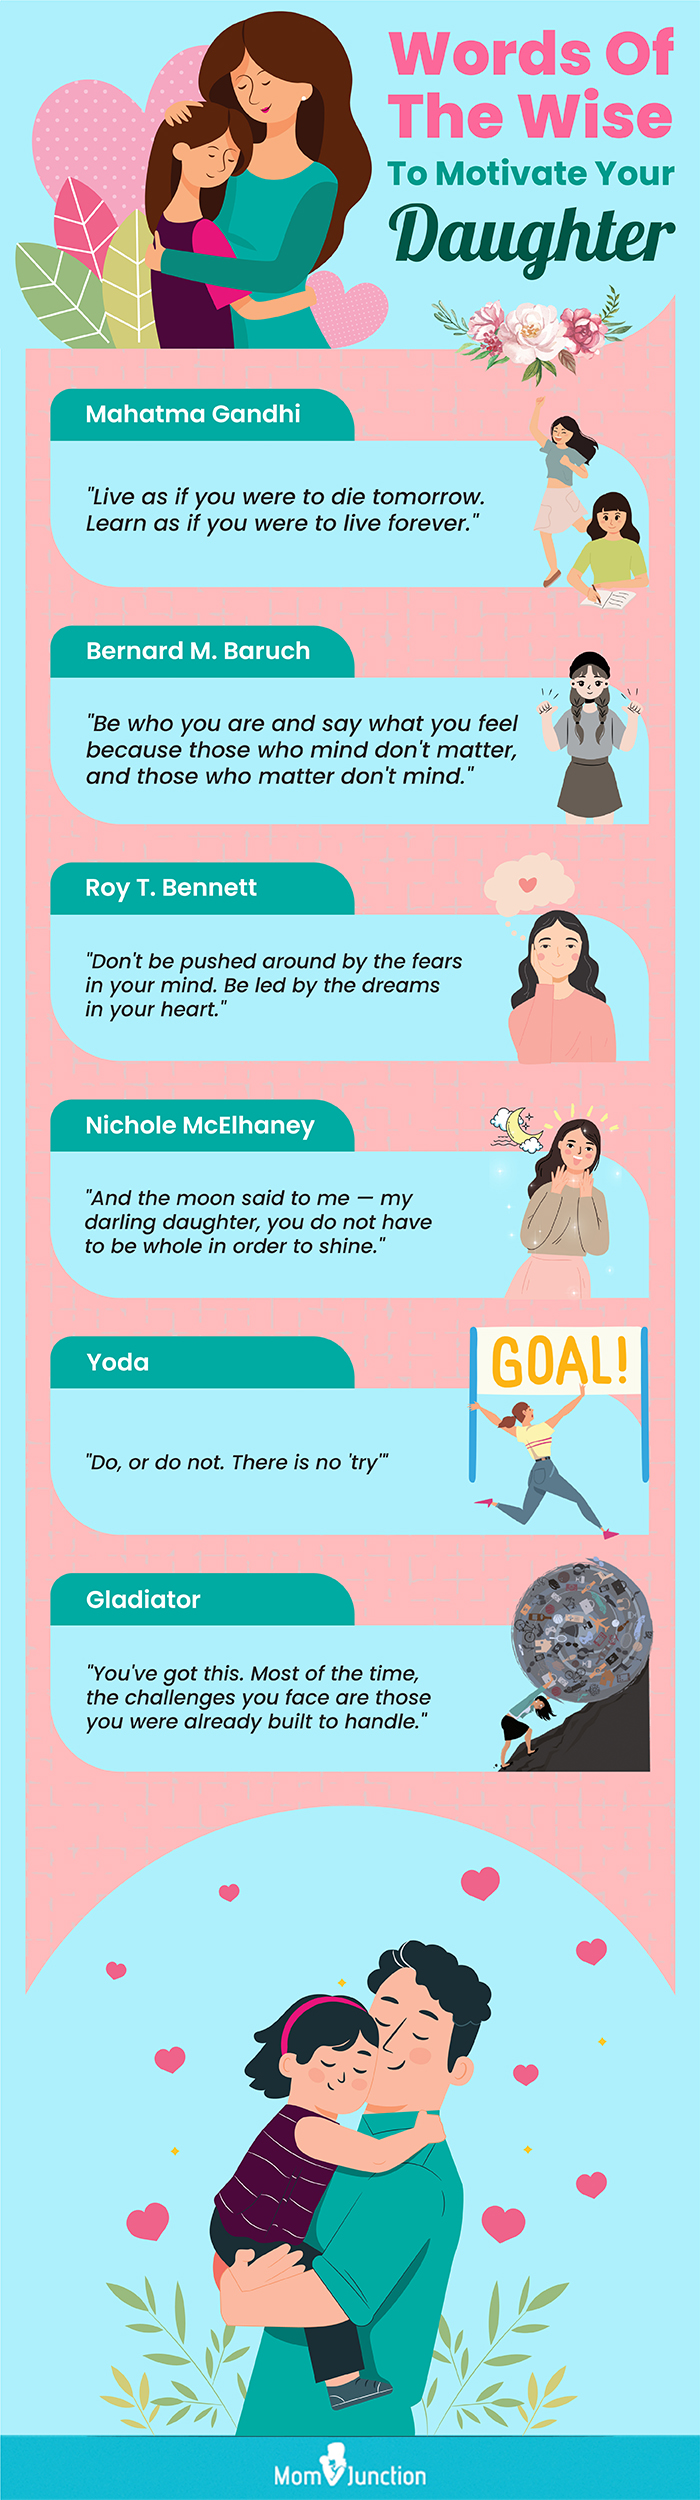 words of the wise to motivate your daughter (infographic)